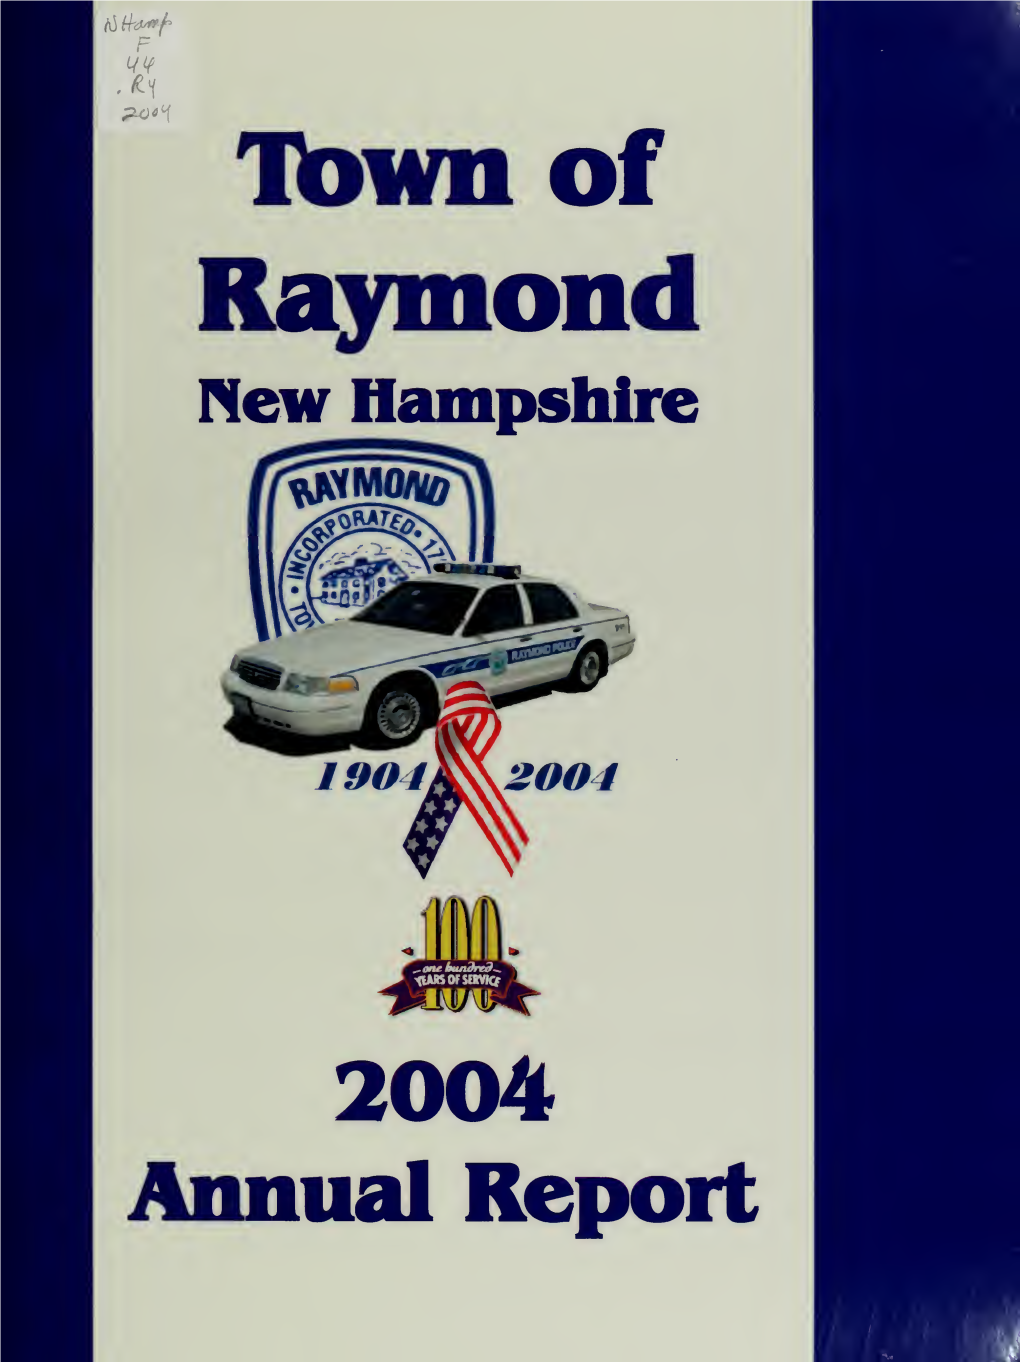 Annual Report of the Town of Raymond, New Hampshire